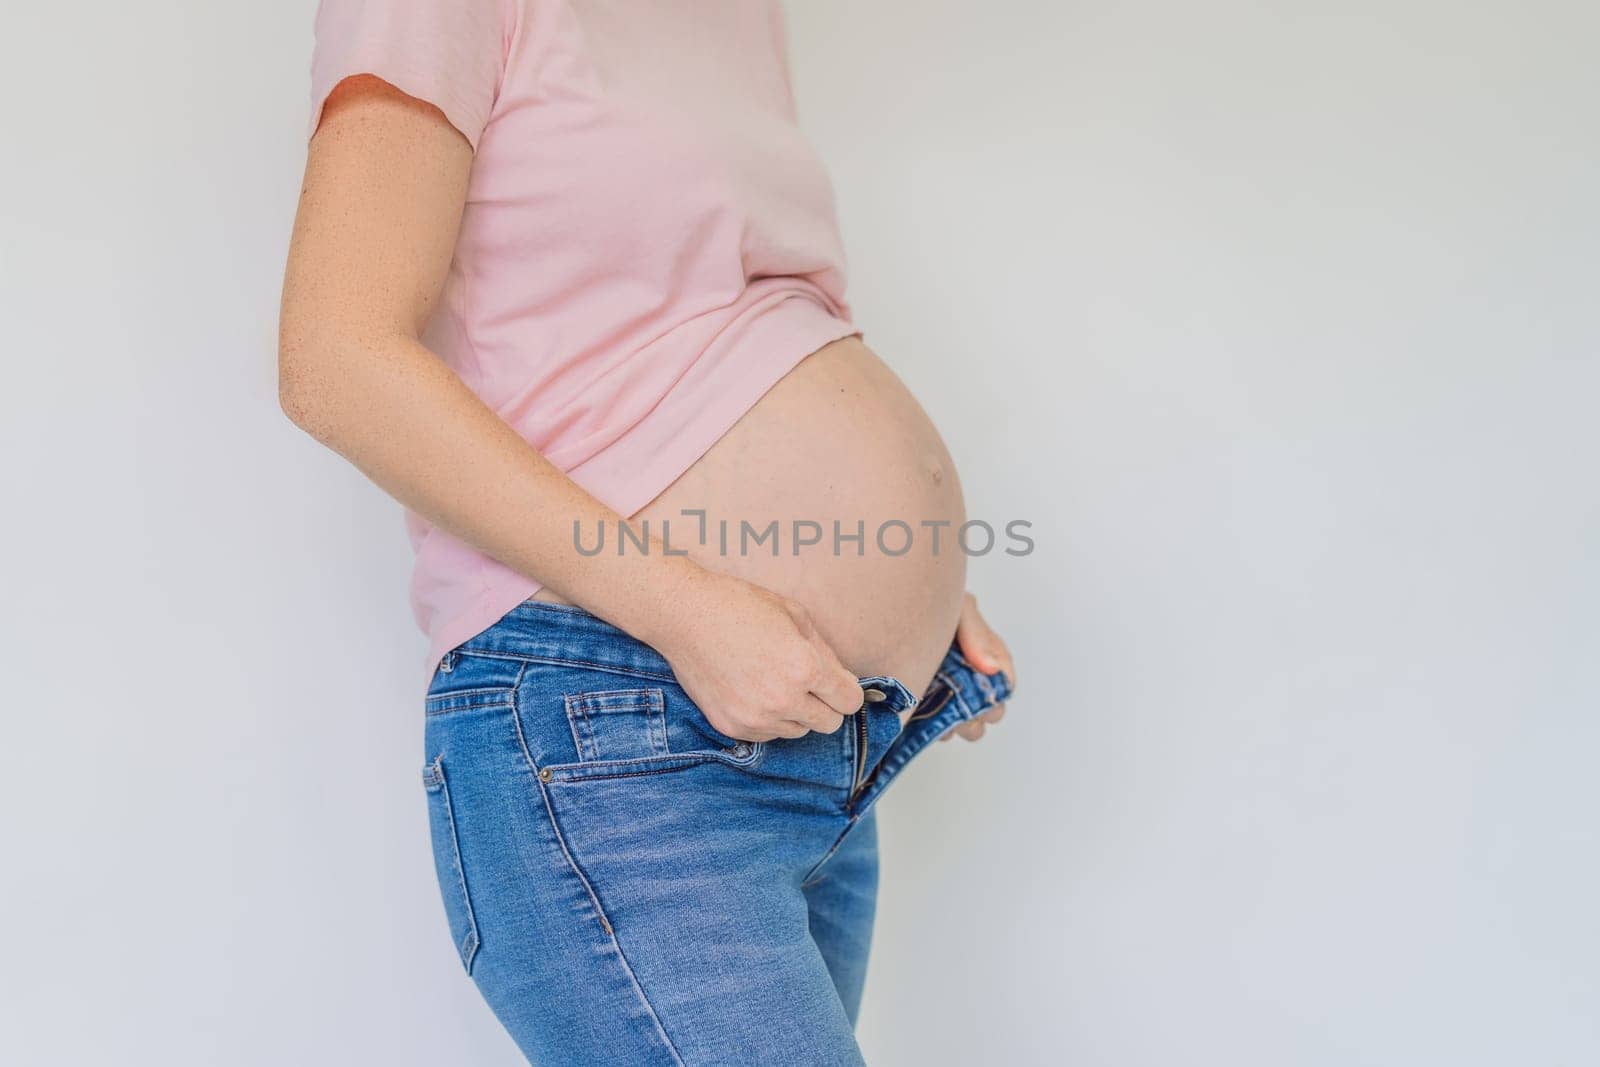 Struggling with jeans. Embrace comfort with maternity wear designed for your growing belly by galitskaya